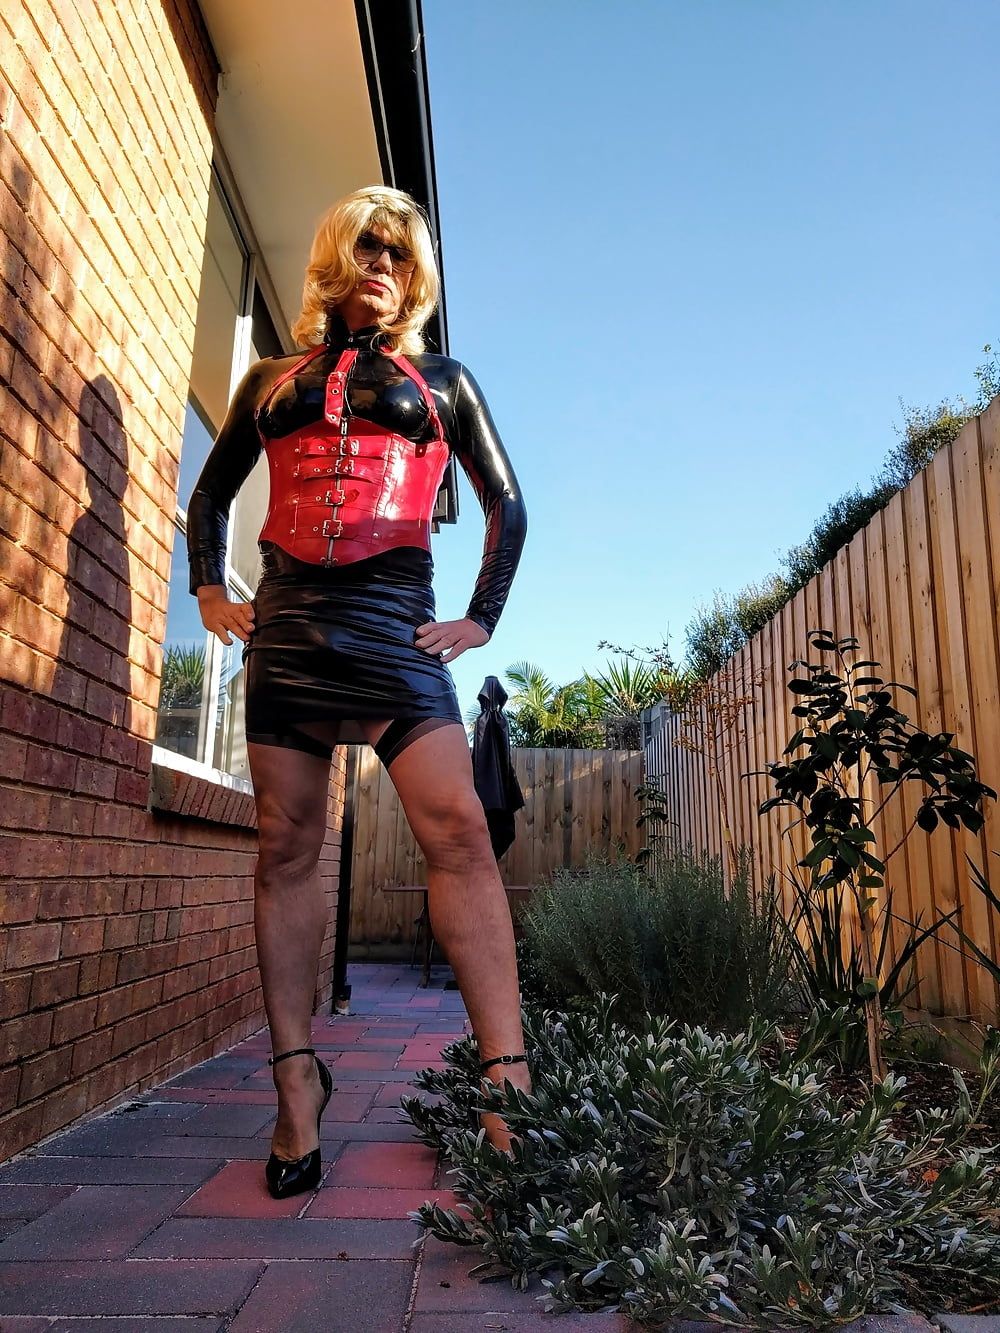 New latex skirt on a sunny Melbourne day #9